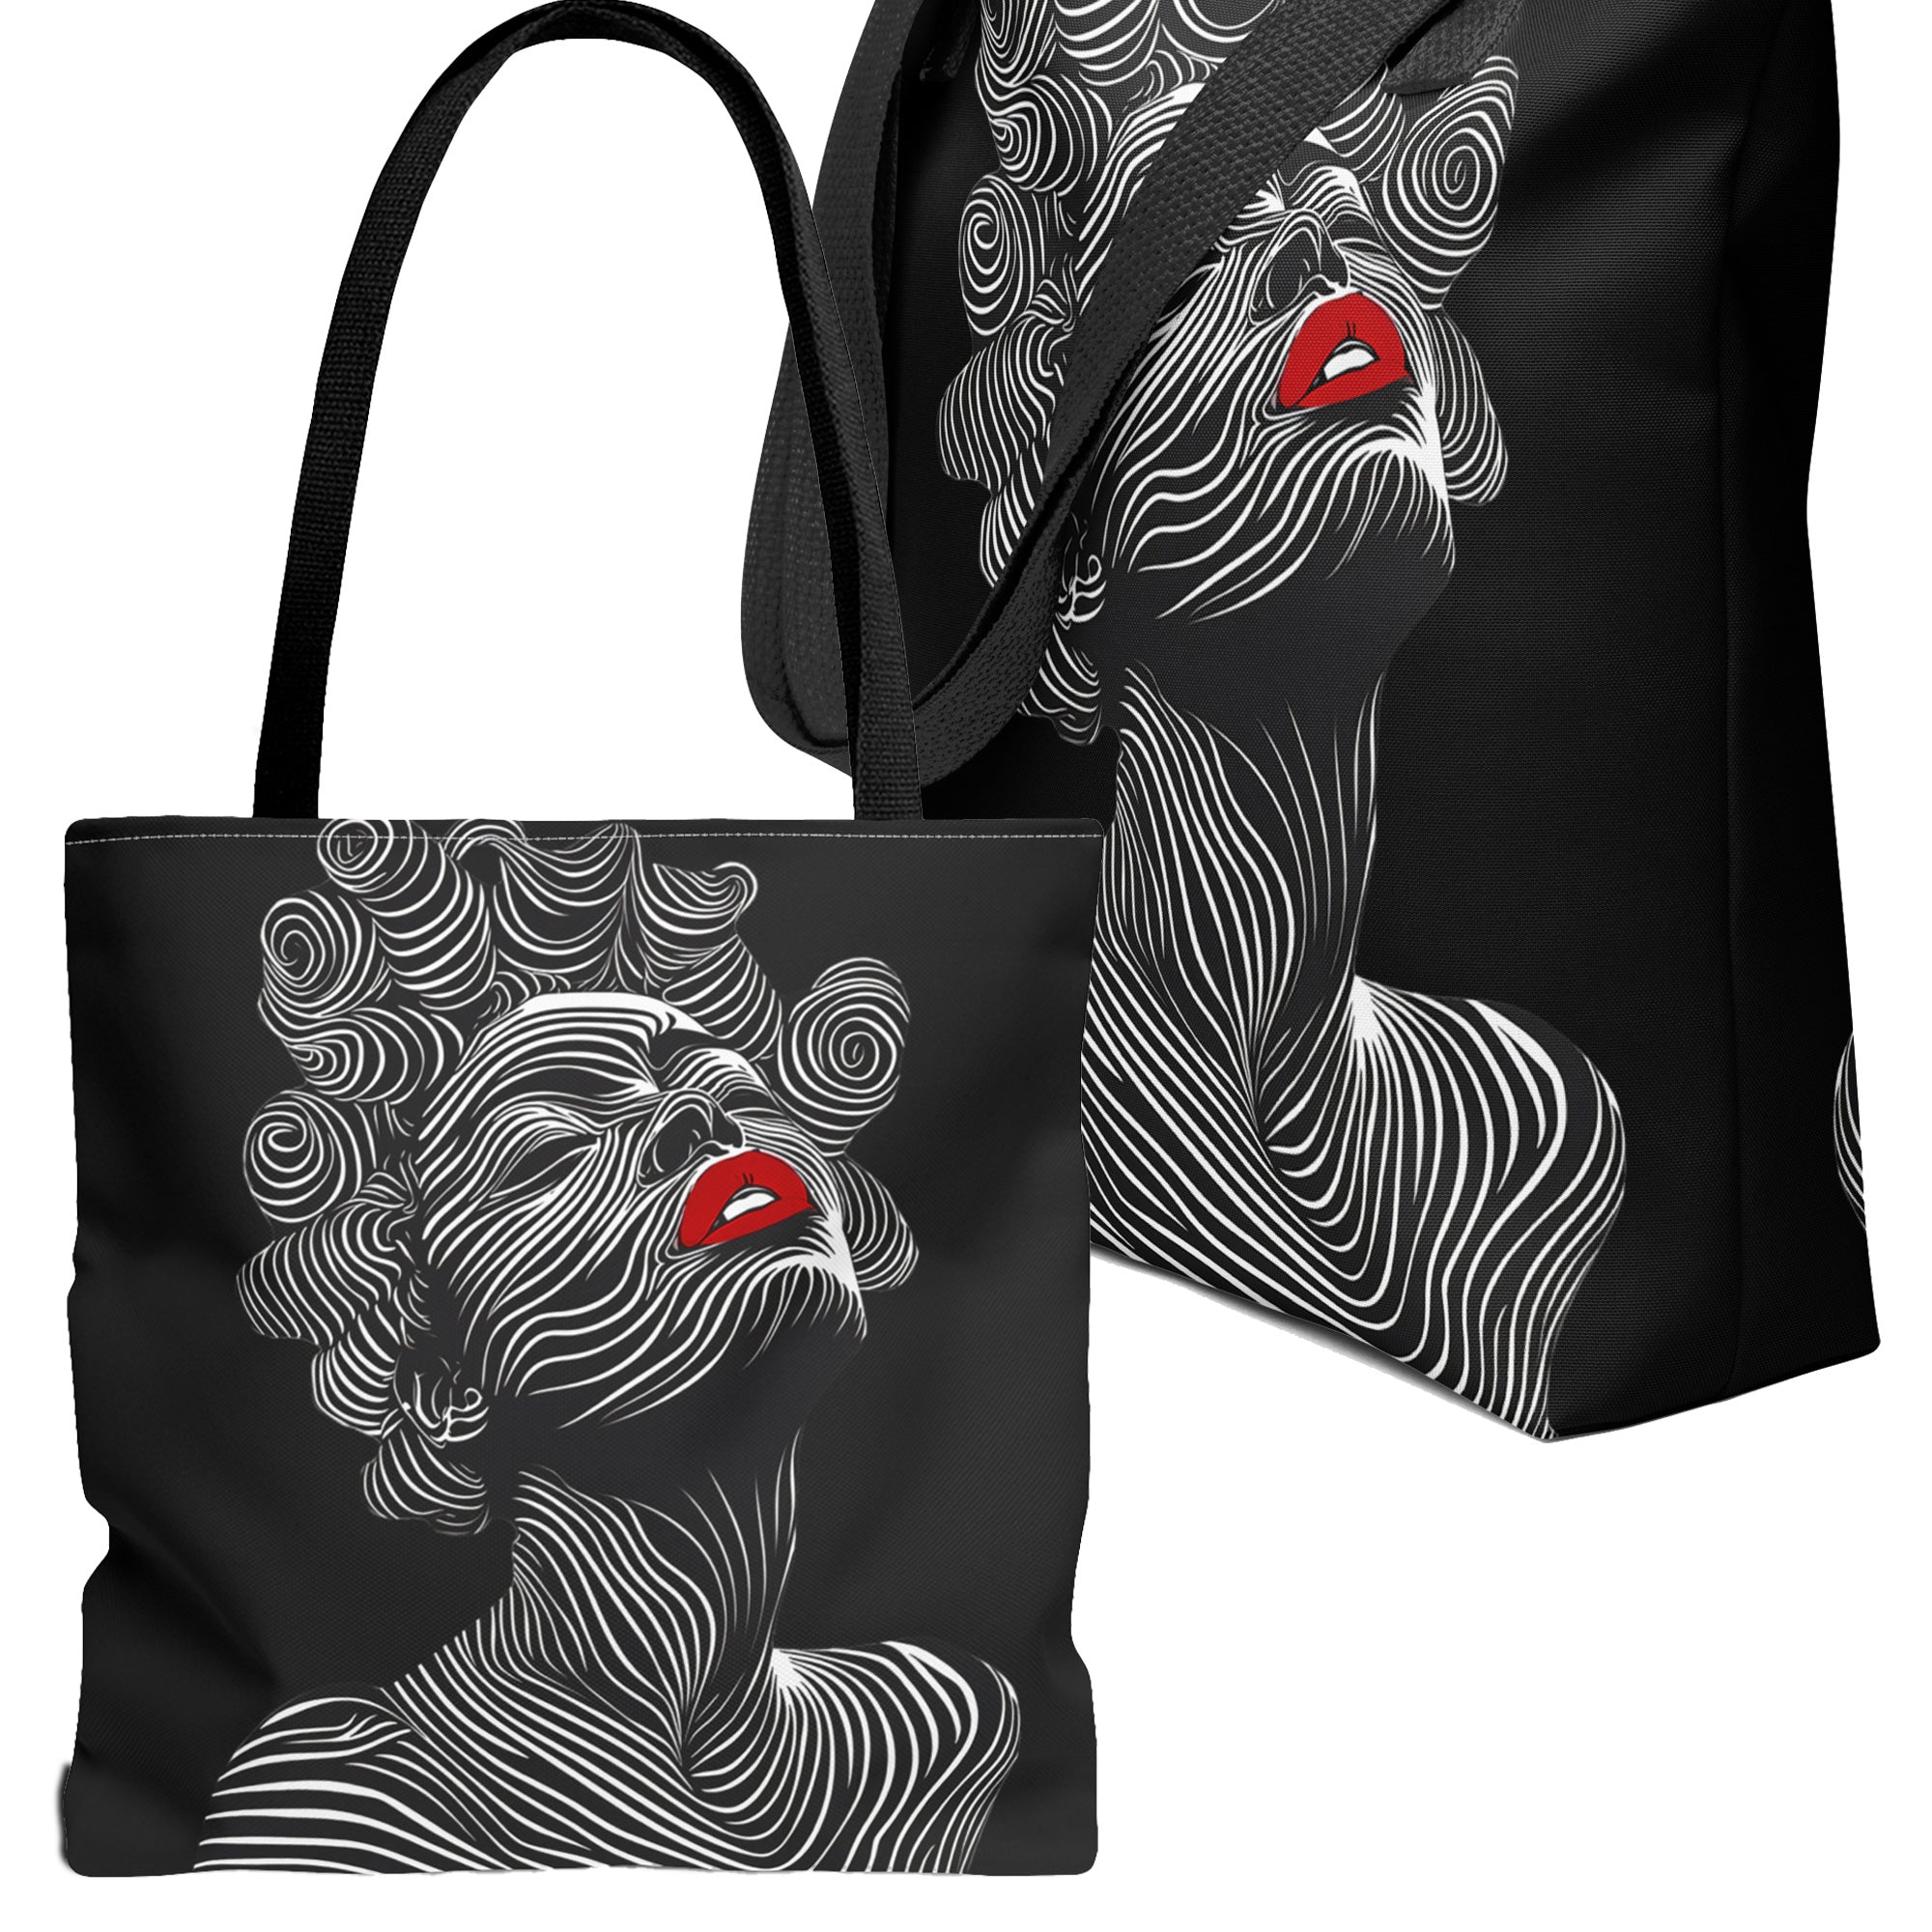 Bantu Knots Tote Bag - front and side views.